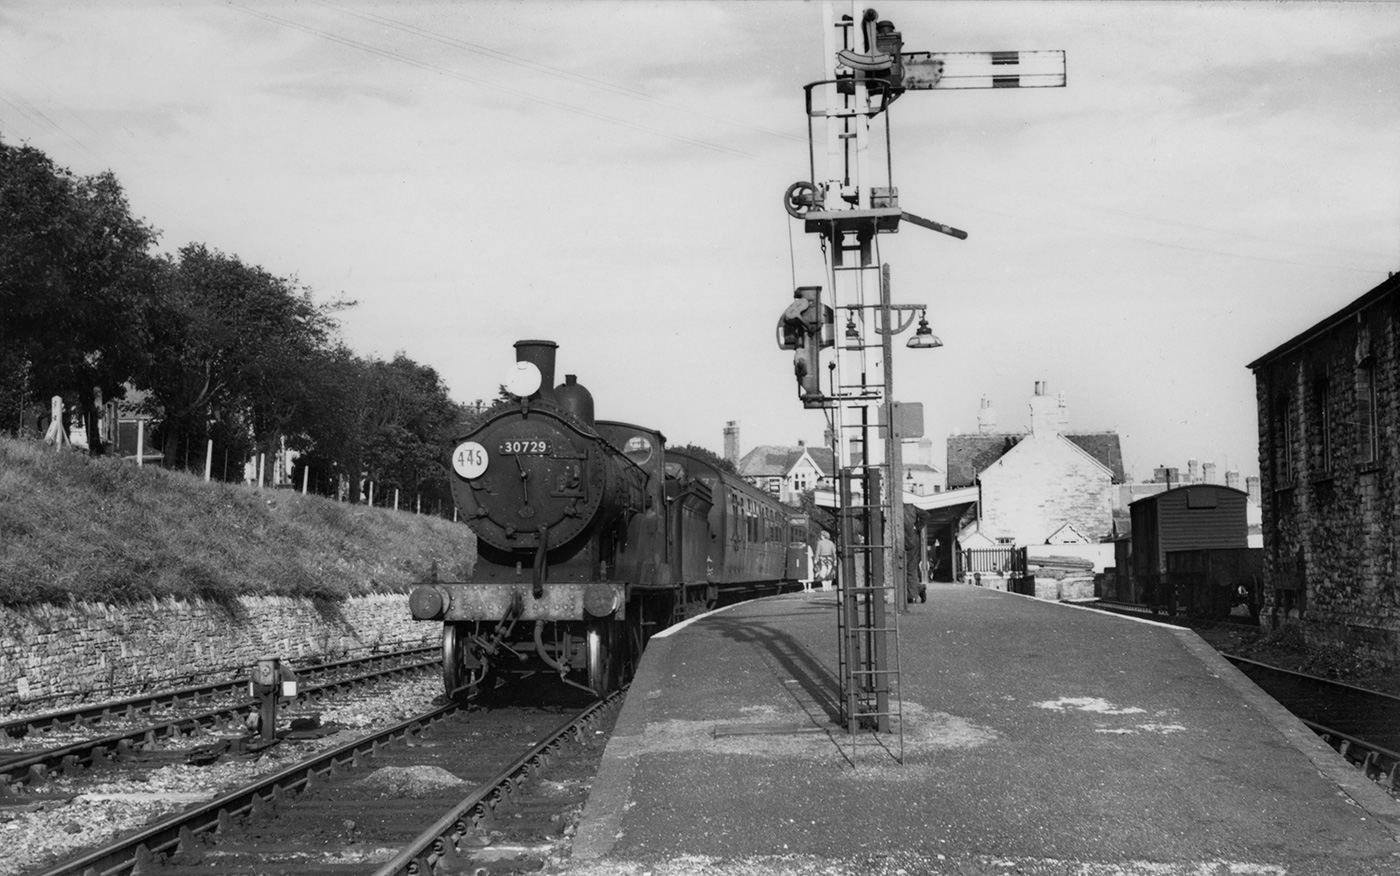 Steam Locomotive Class T9 30729 at Swanage Station